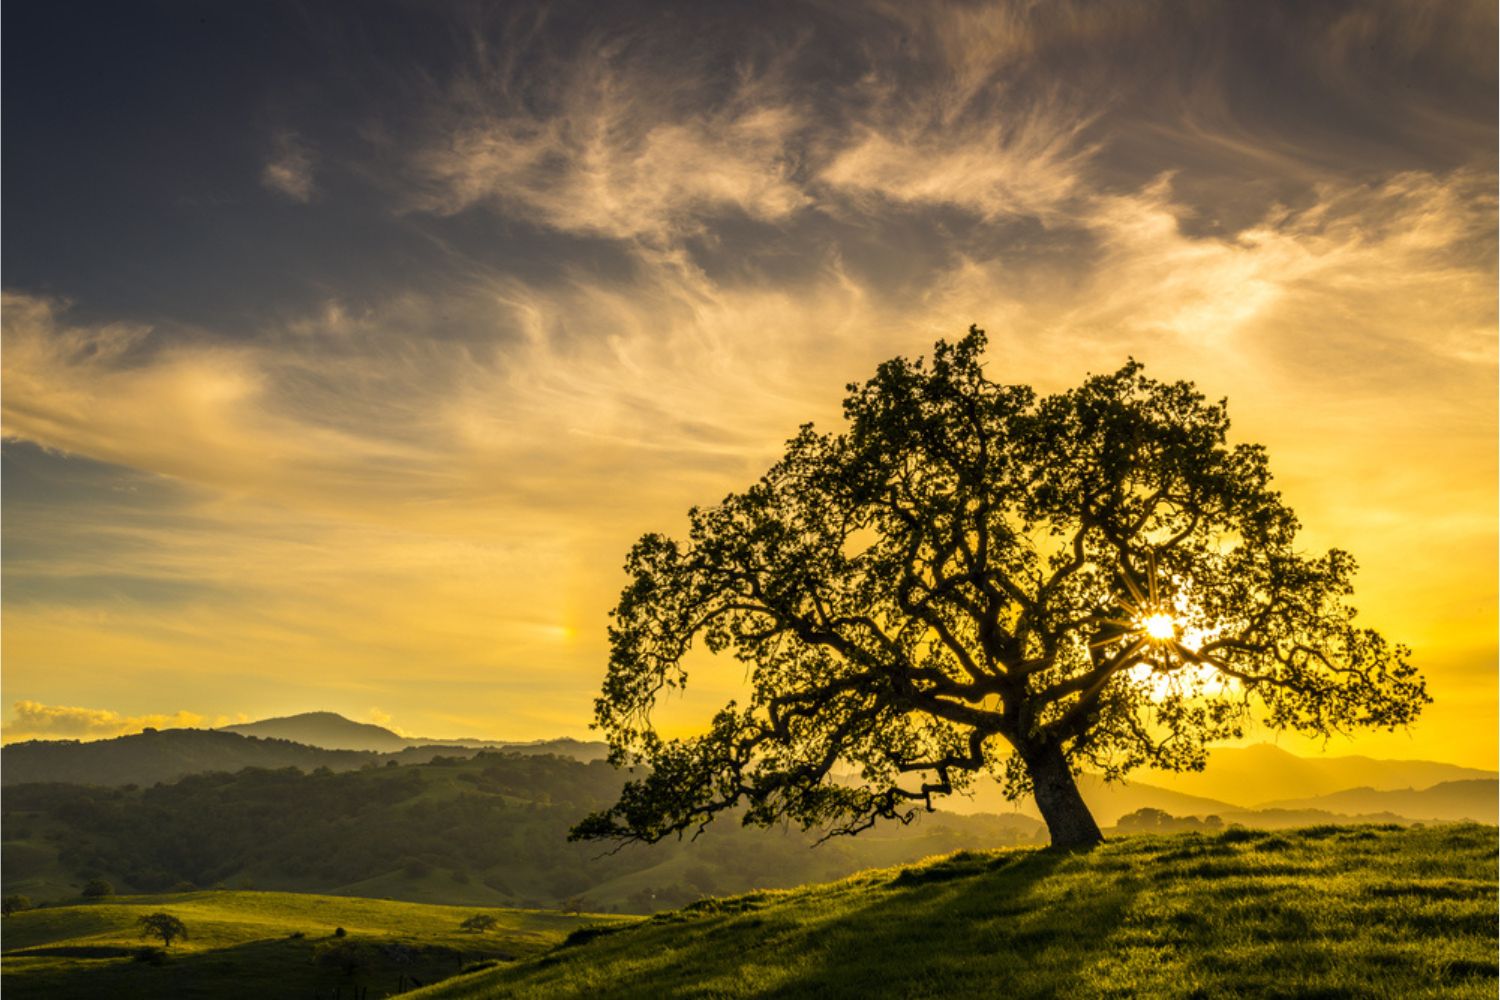 oak tree with sun setting in background